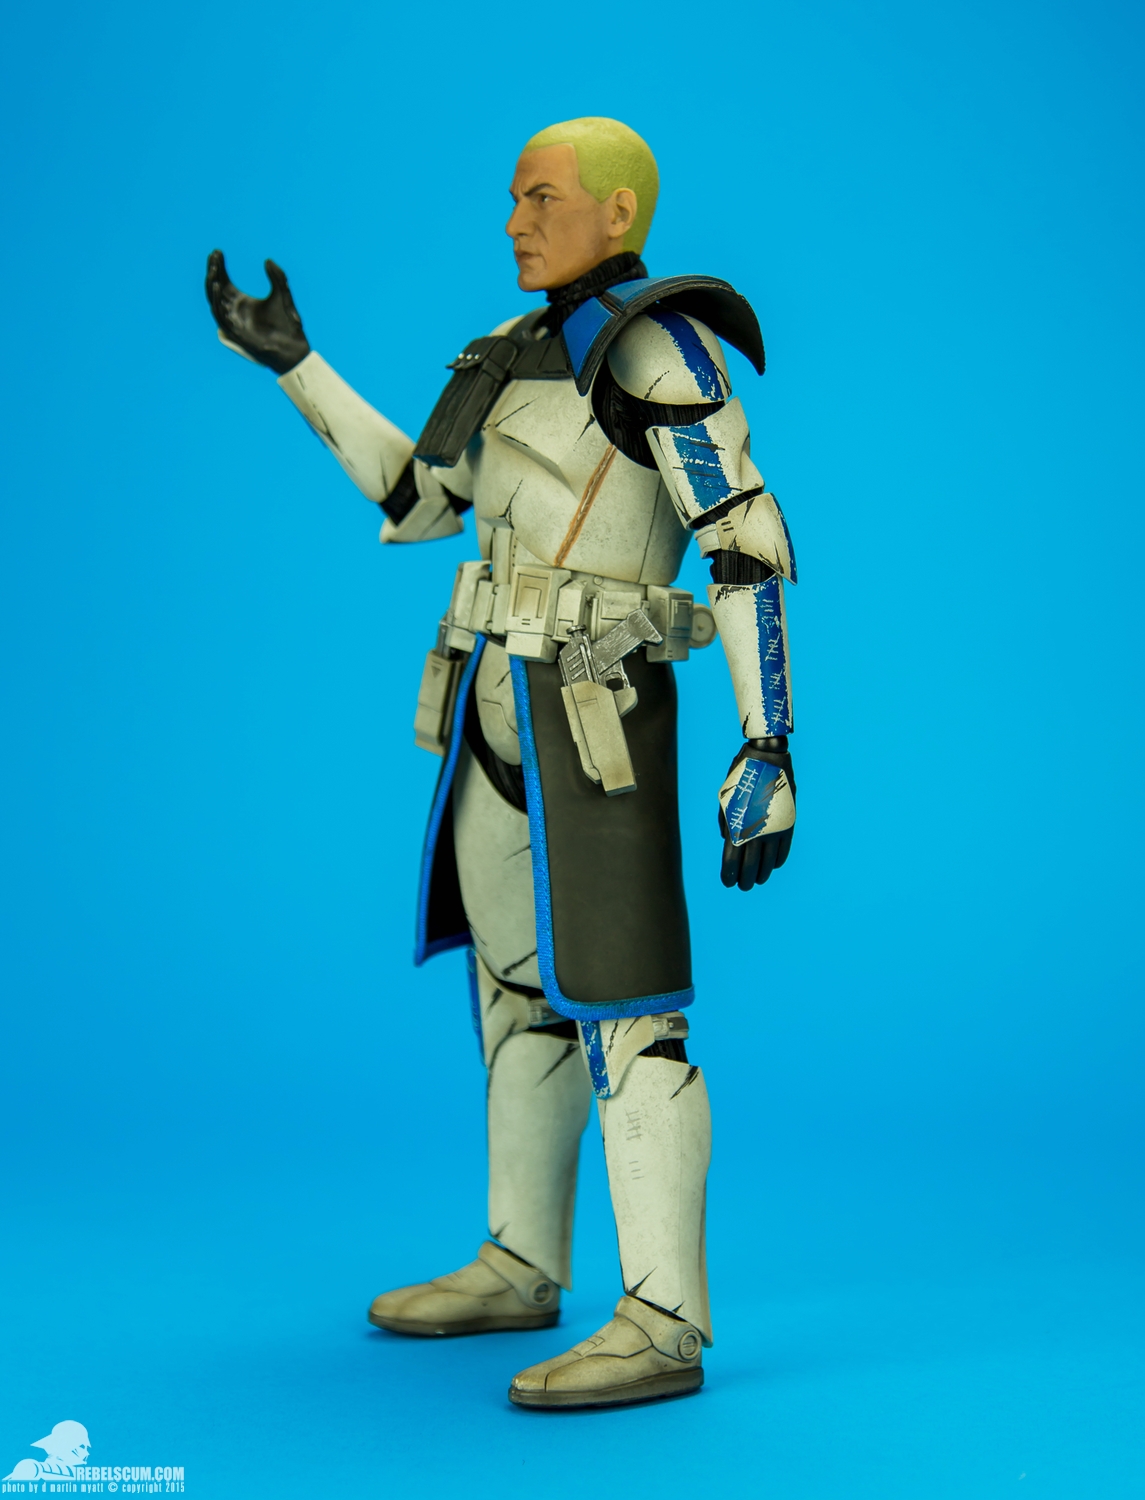 Captain-Rex-Phase-II-Sixth-Scale-Figure-Sideshow-Collectibles-003.jpg